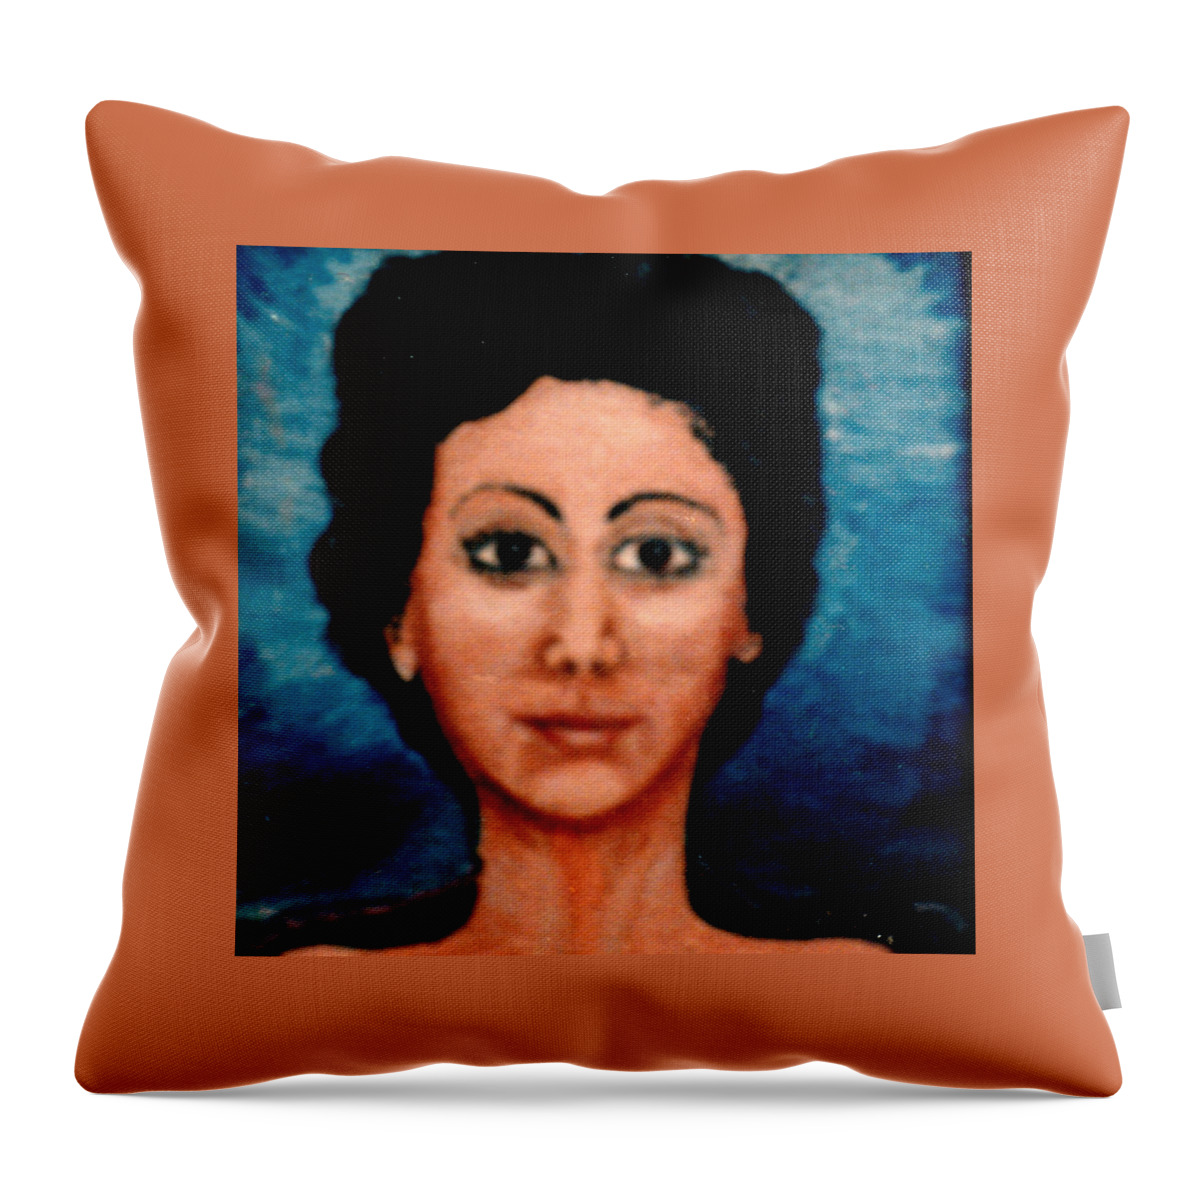 Emma Throw Pillow featuring the painting Portrait Of Emma Age 28 by Mackenzie Moulton